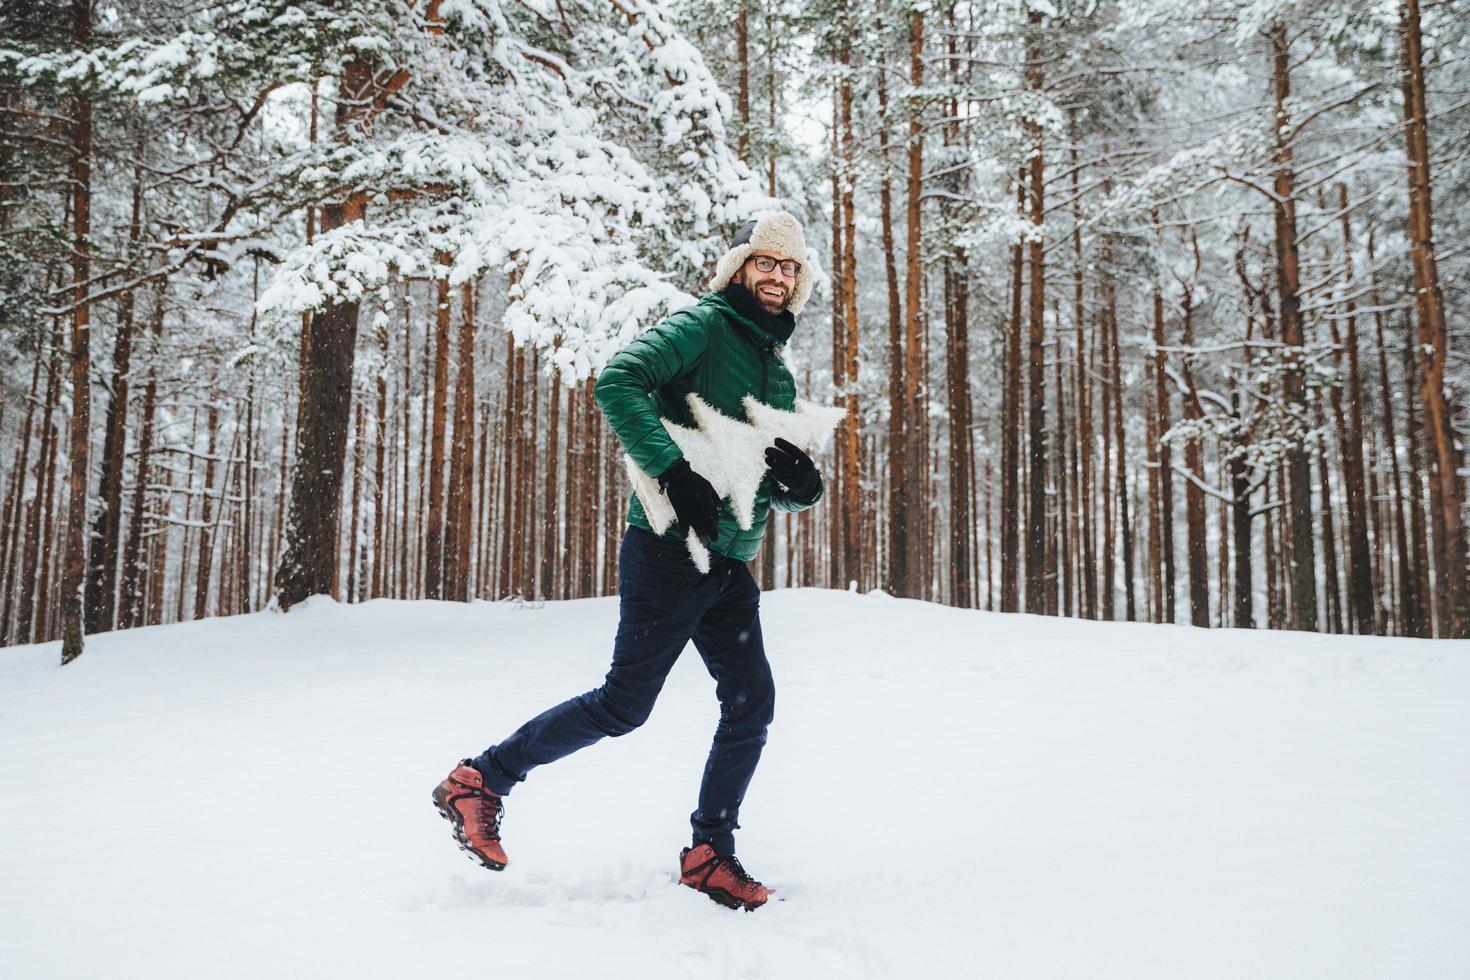 Optimistic young male dressed in warm winter clothes, has fun outdoor in winter forest, breath fresh air, glad to see much snow, holds atrficial fir tree in hands. People, season, weather concept photo